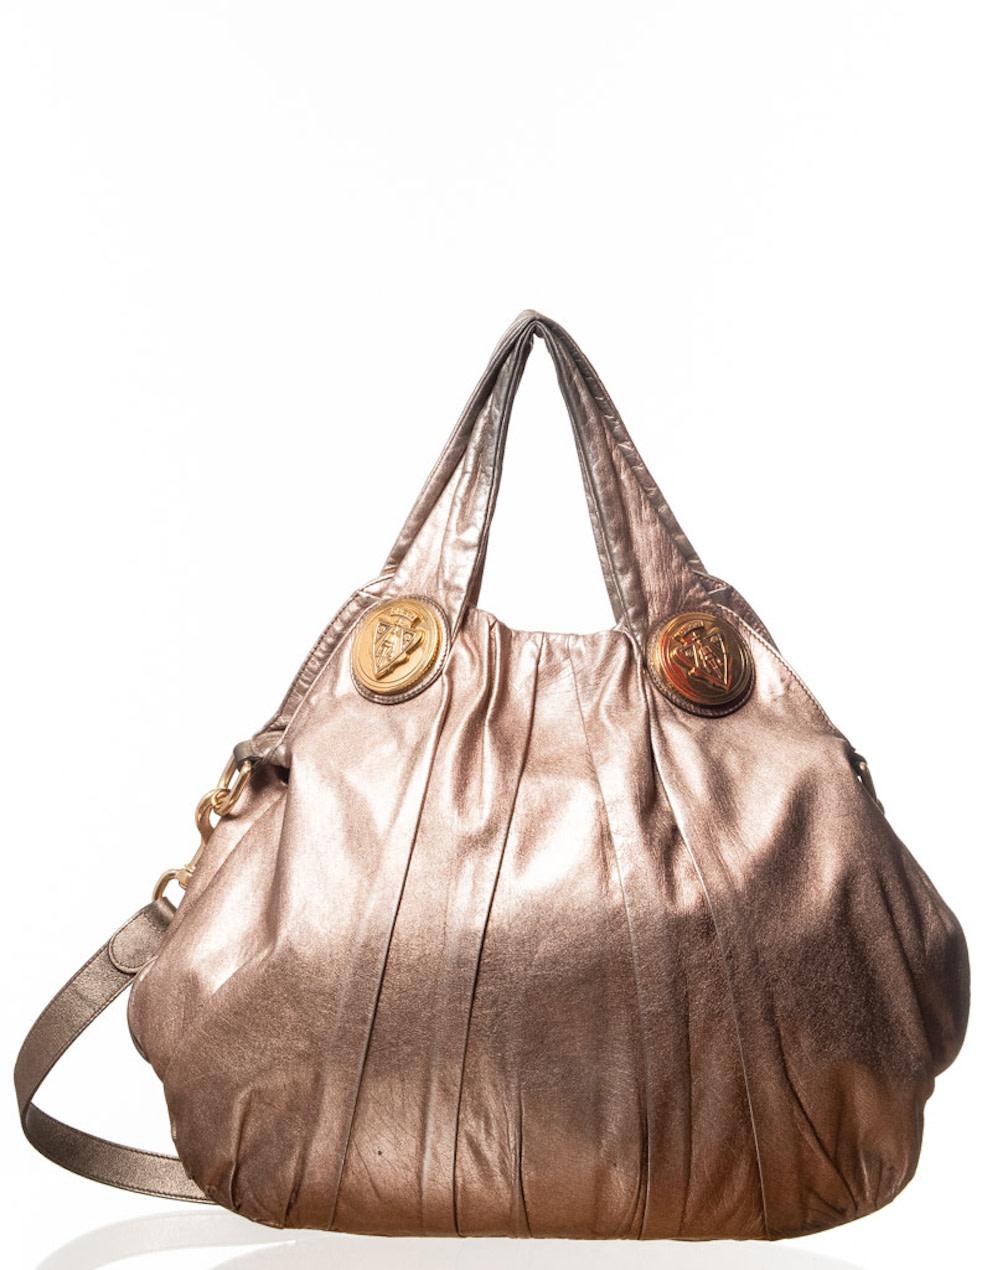 This Gucci Hobo is made of bronzed silver leather with gold crest plates and features a metallic grey exterior and two handles, a small one and a long one. The long one can be removable. 

COLOR: Metallic
MATERIAL: Leather
ITEM CODE: 197016